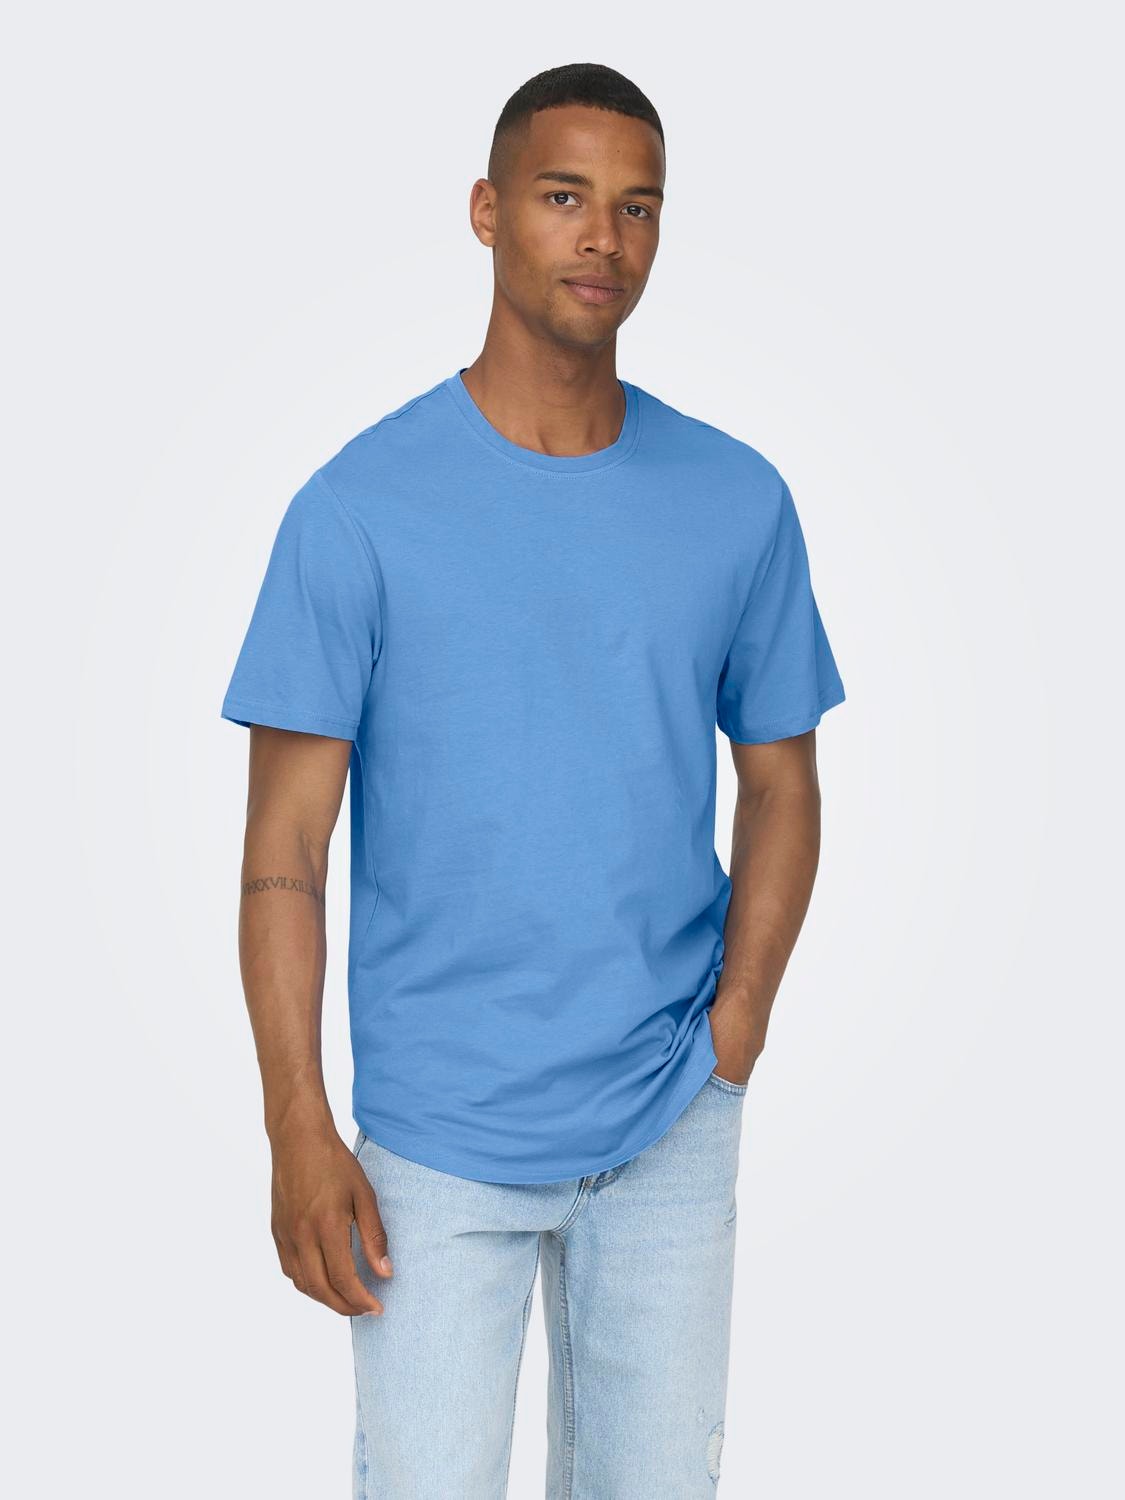 ONLY & SONS Long line fit O-hals T-shirts -Marina - 22002973